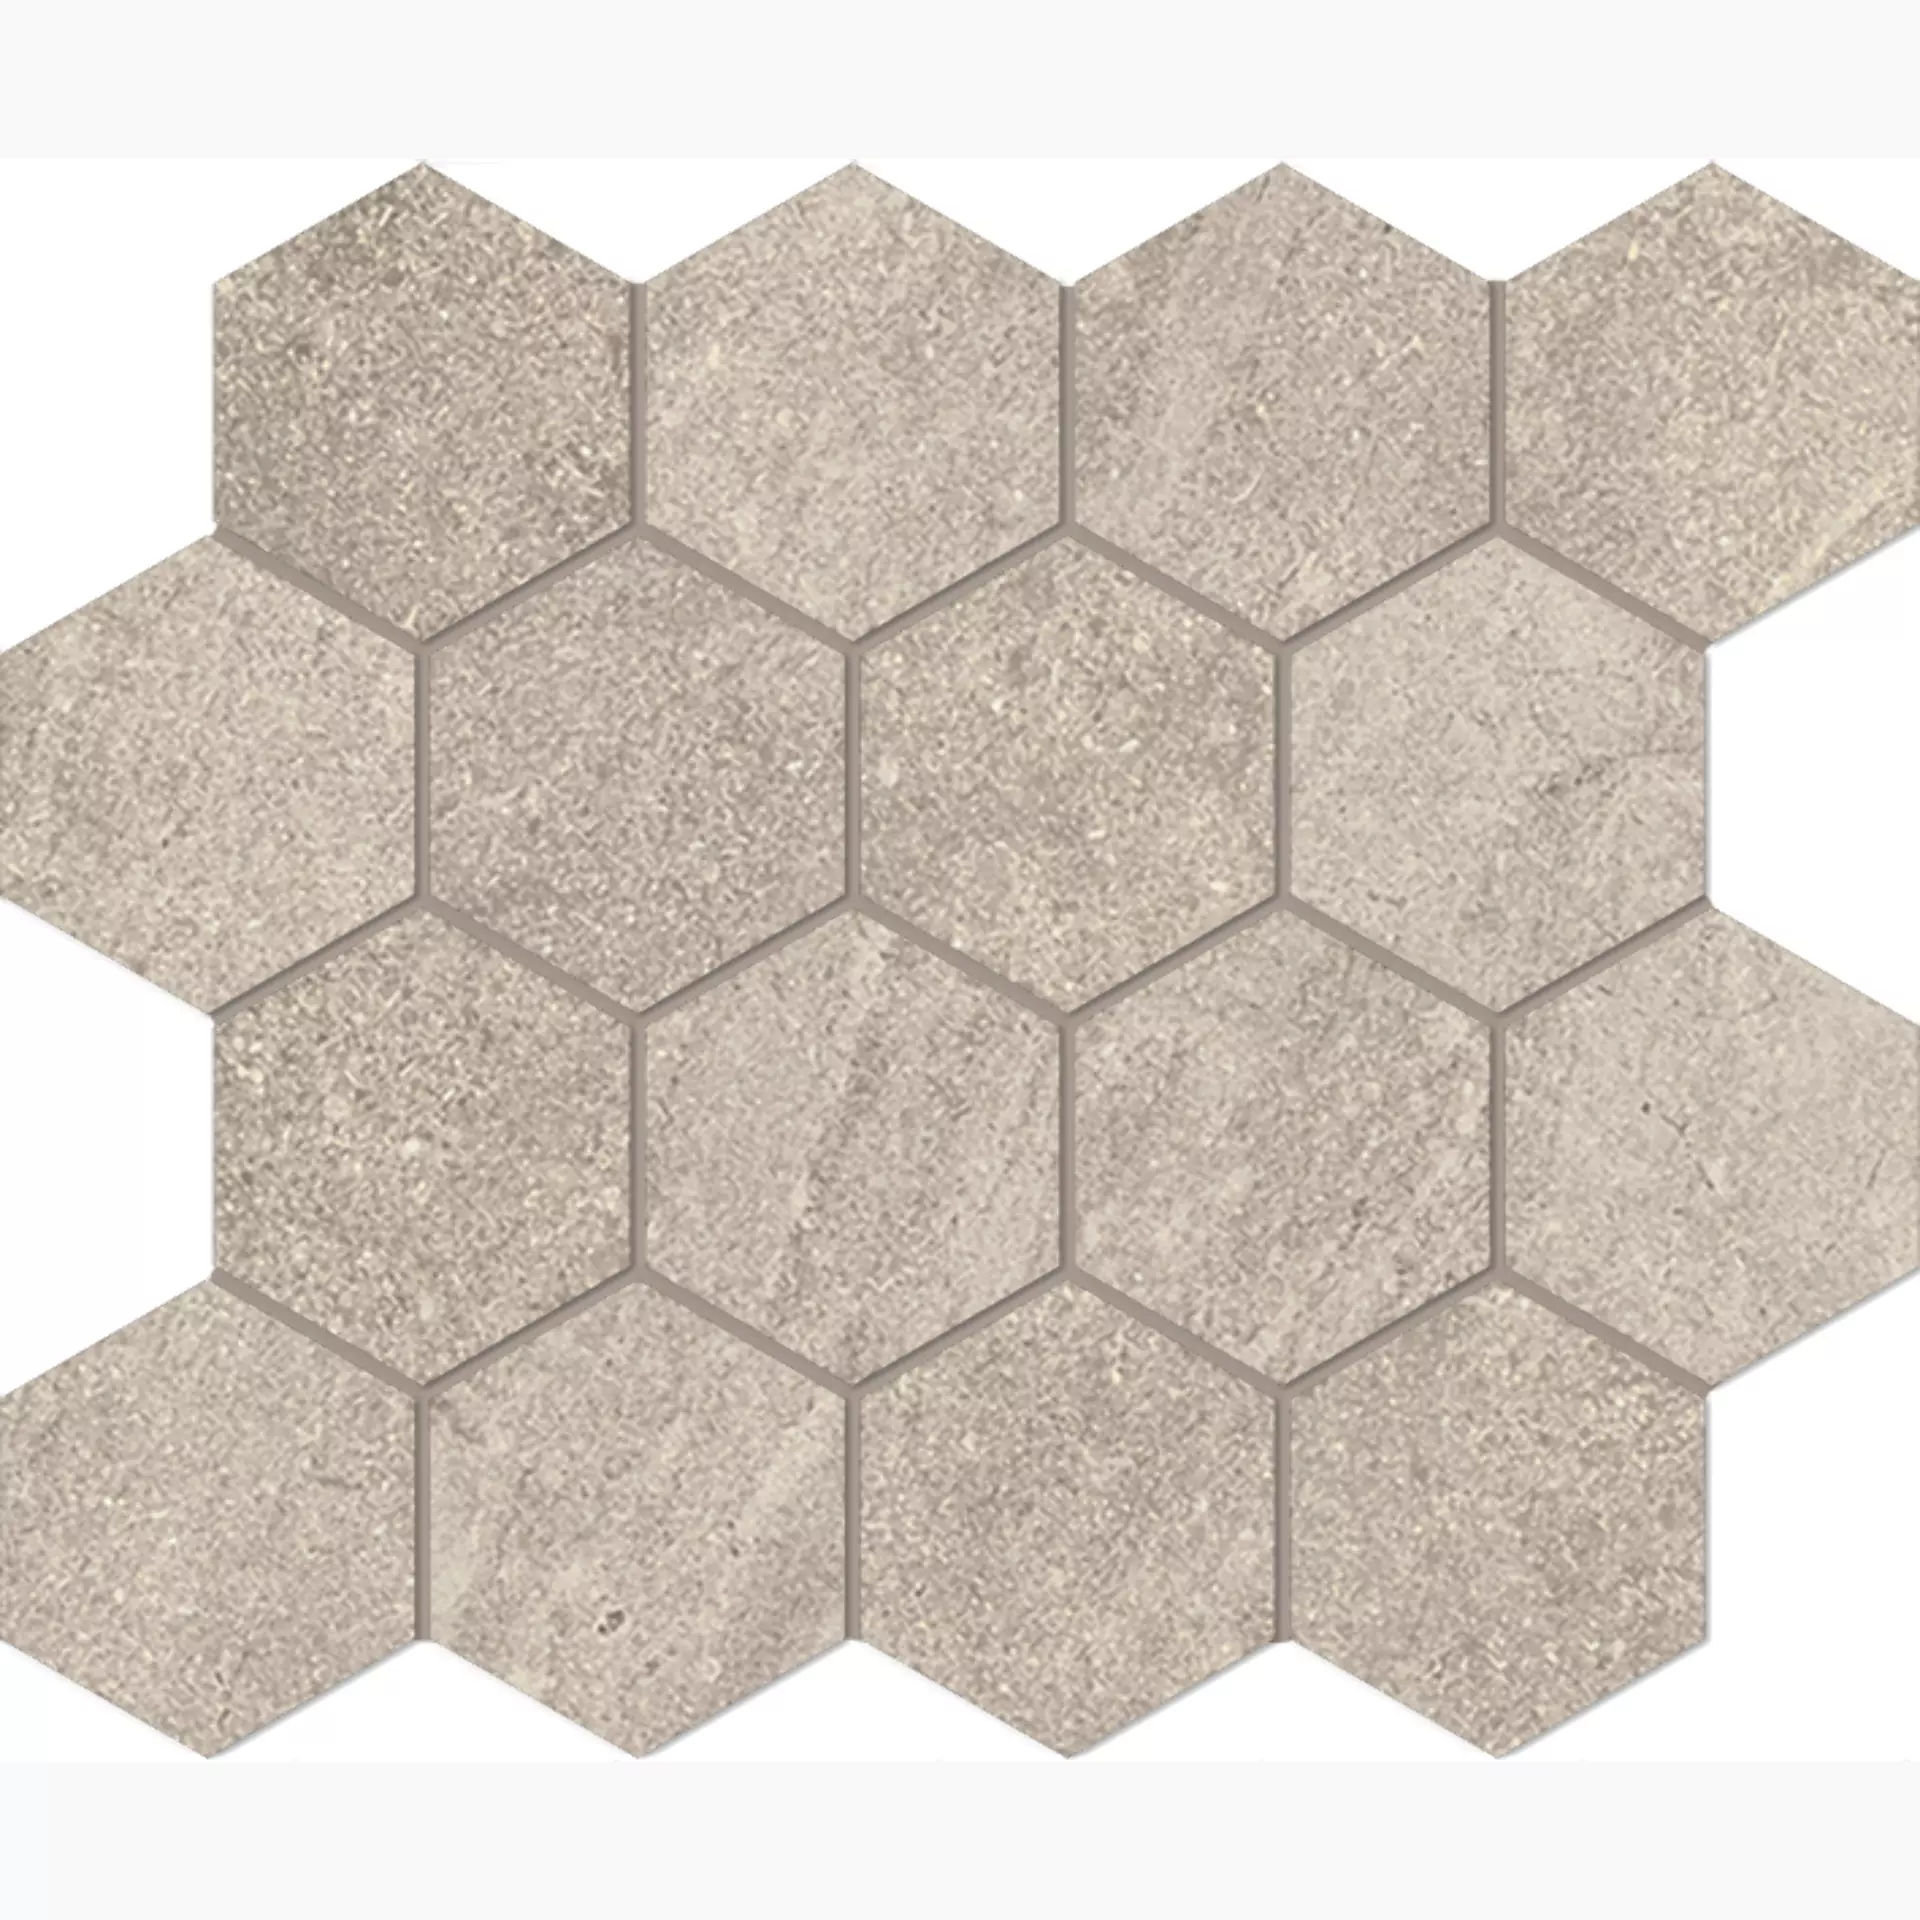 Fondovalle Planeto Moon Natural Mosaic Hexagon PNT034A 26x30cm rectified 8,5mm